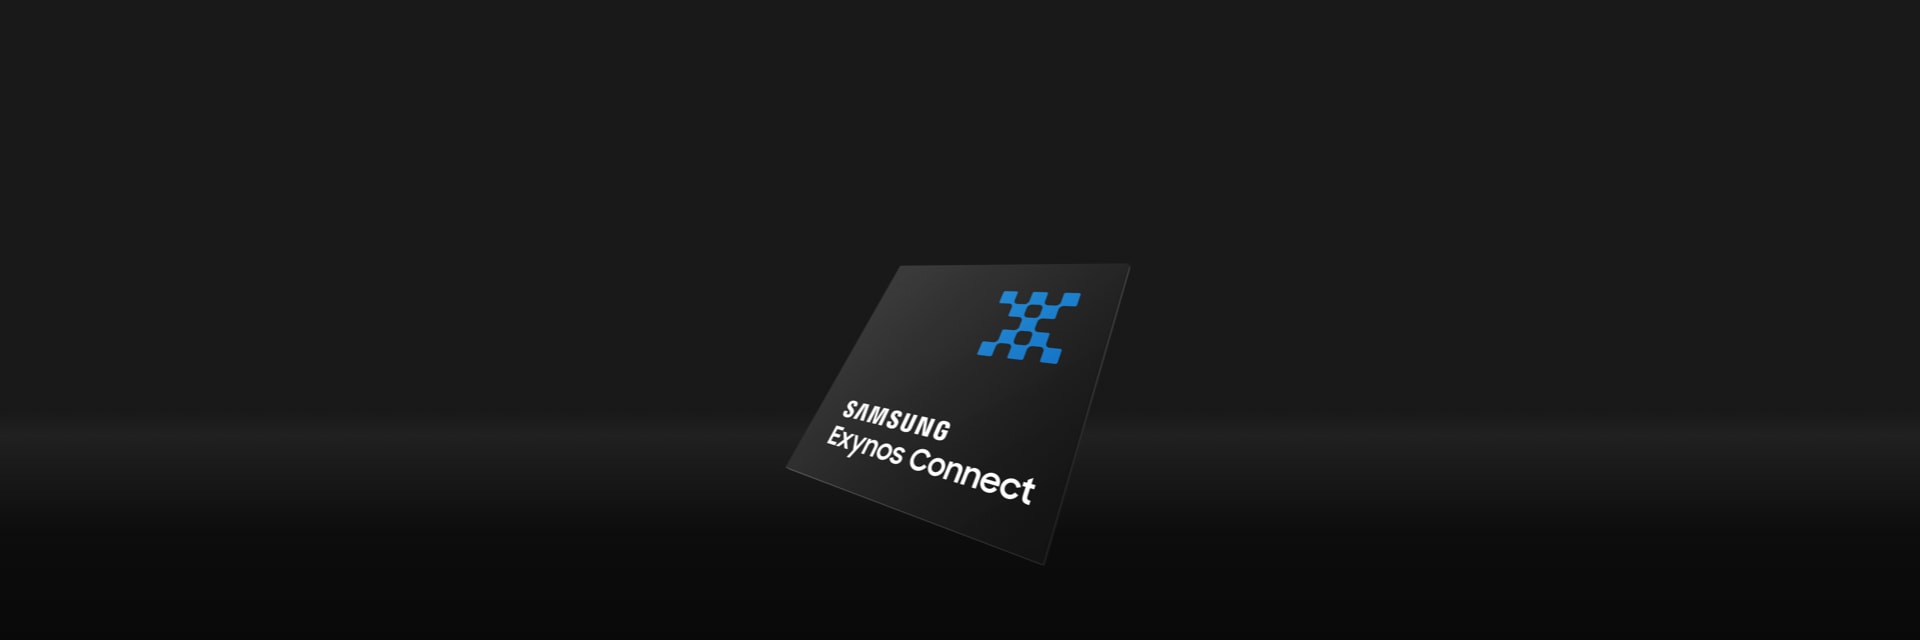 Samsung Exynos Connect U100 memory chip is displayed on a black background at a slightly slanted angle, Ultra-wide connectivity, Samsung Semiconductor